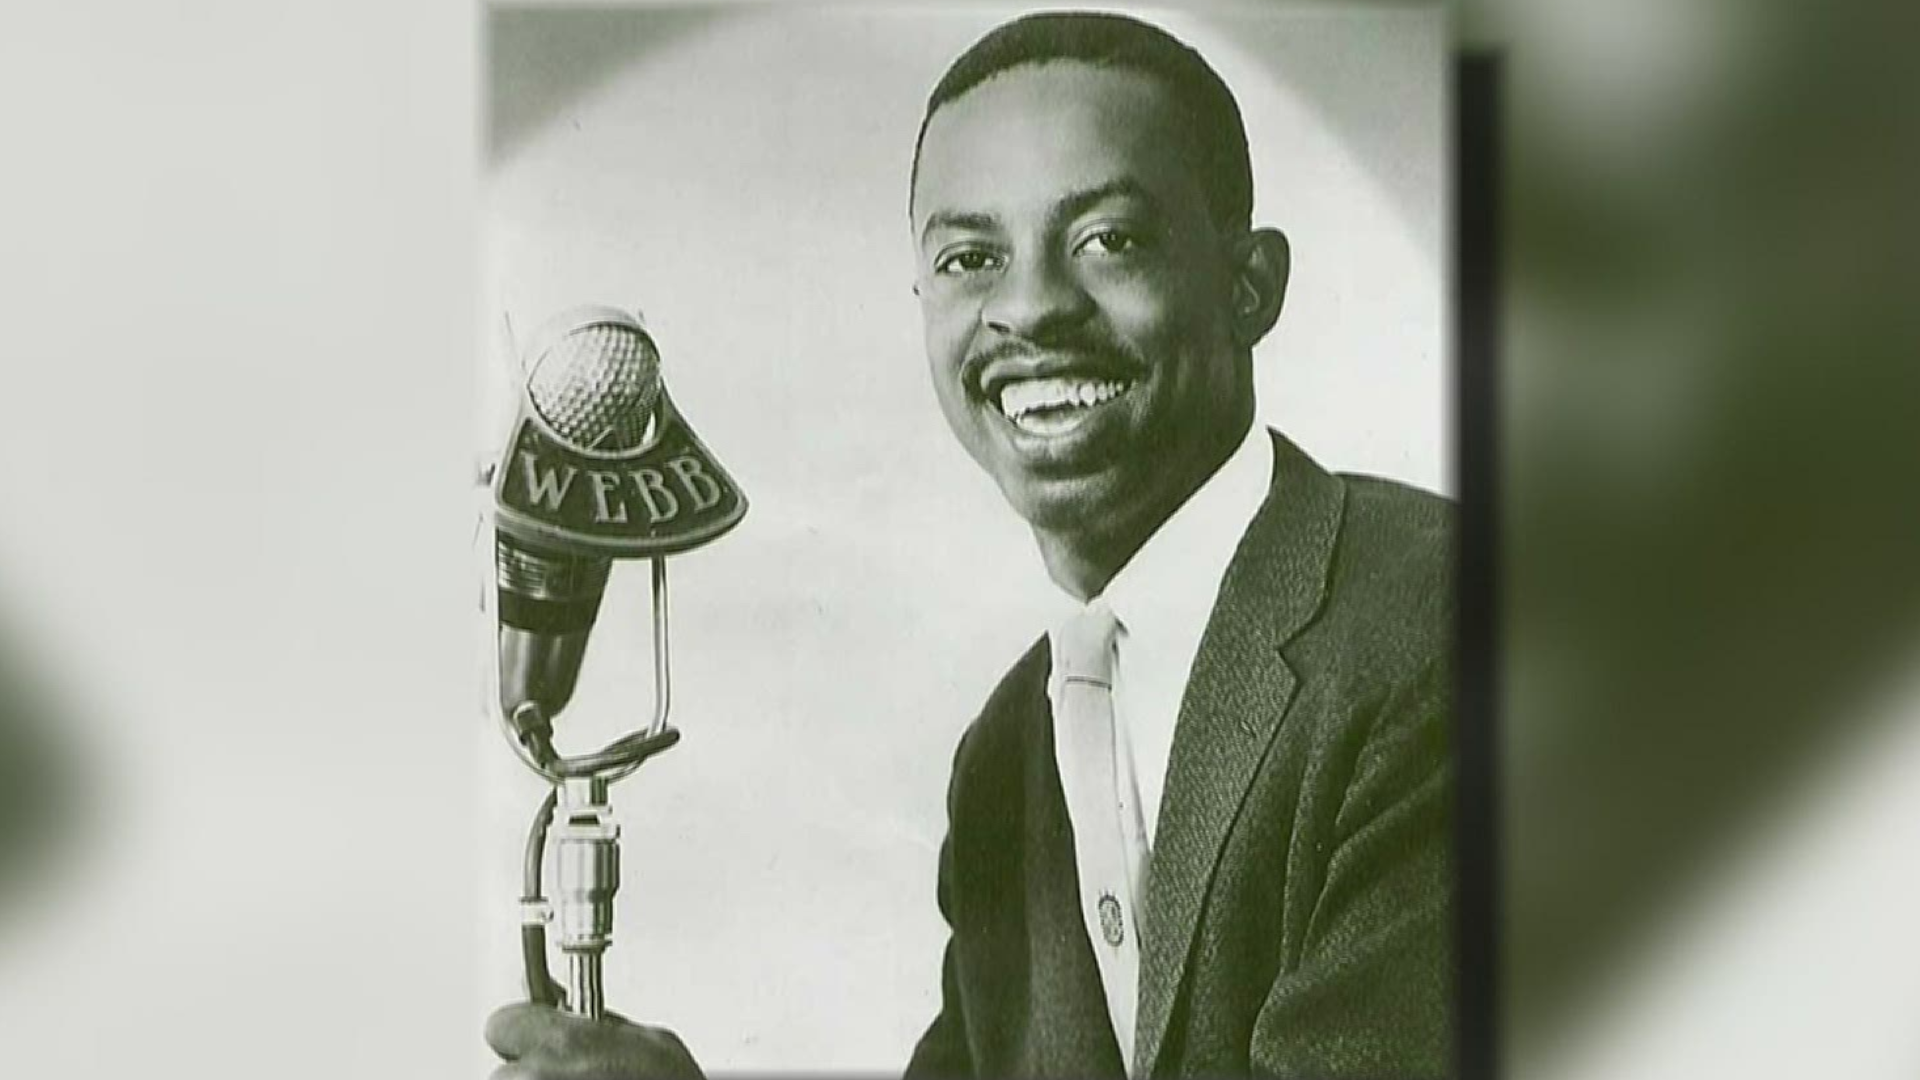 Pinkney was the first black person to work as a play-by-play announcer on a major television network. He lived in Hampton at the end of his life.